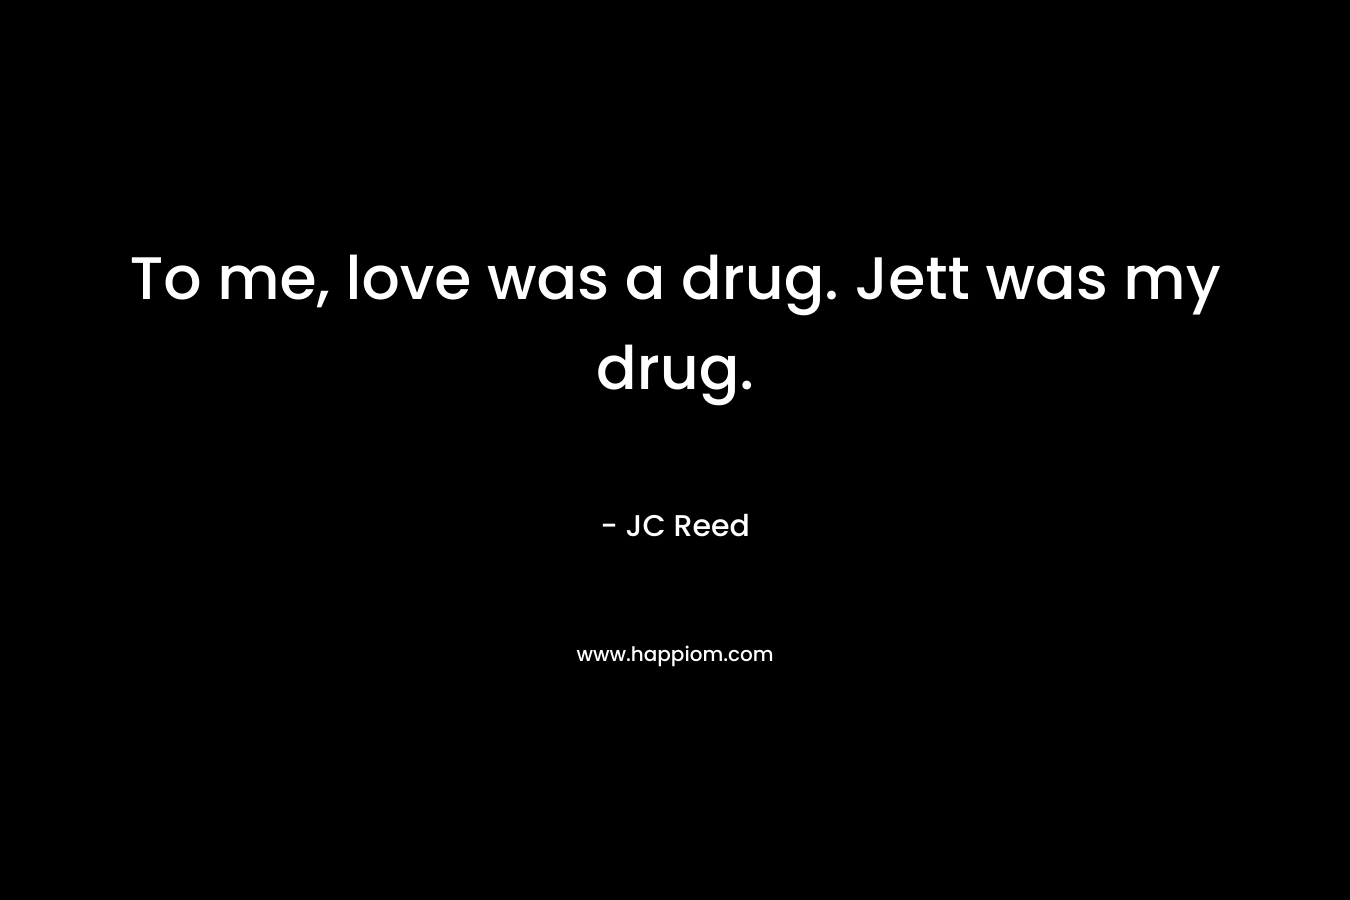 To me, love was a drug. Jett was my drug. – JC Reed